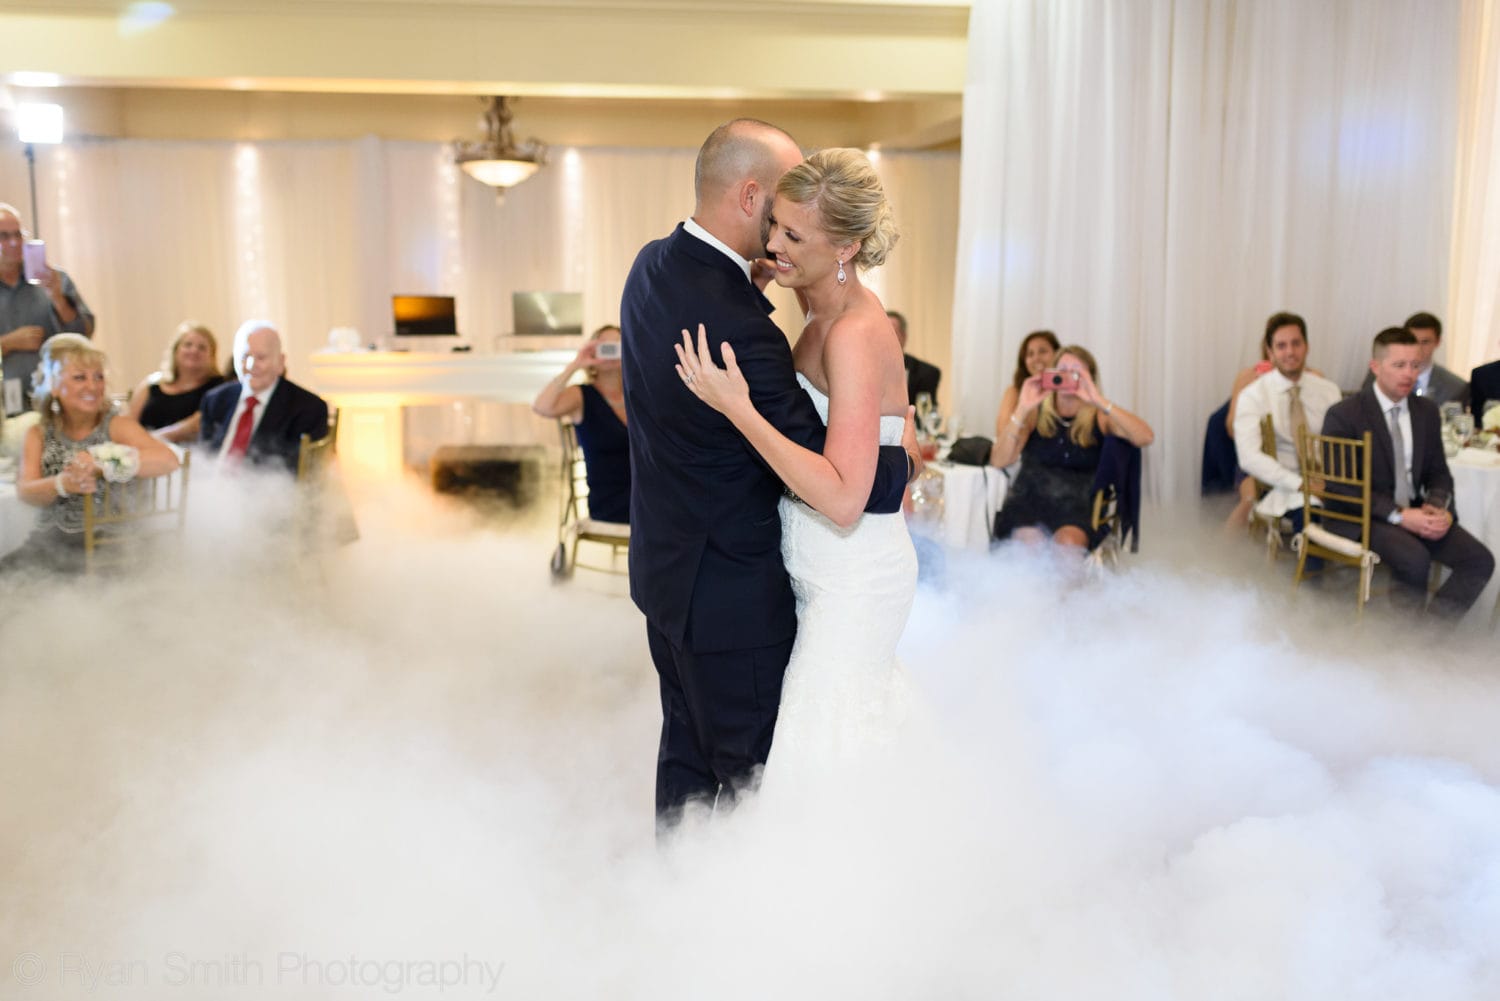 First dance with fog on the dance floor - Members Club - Grande Dunes